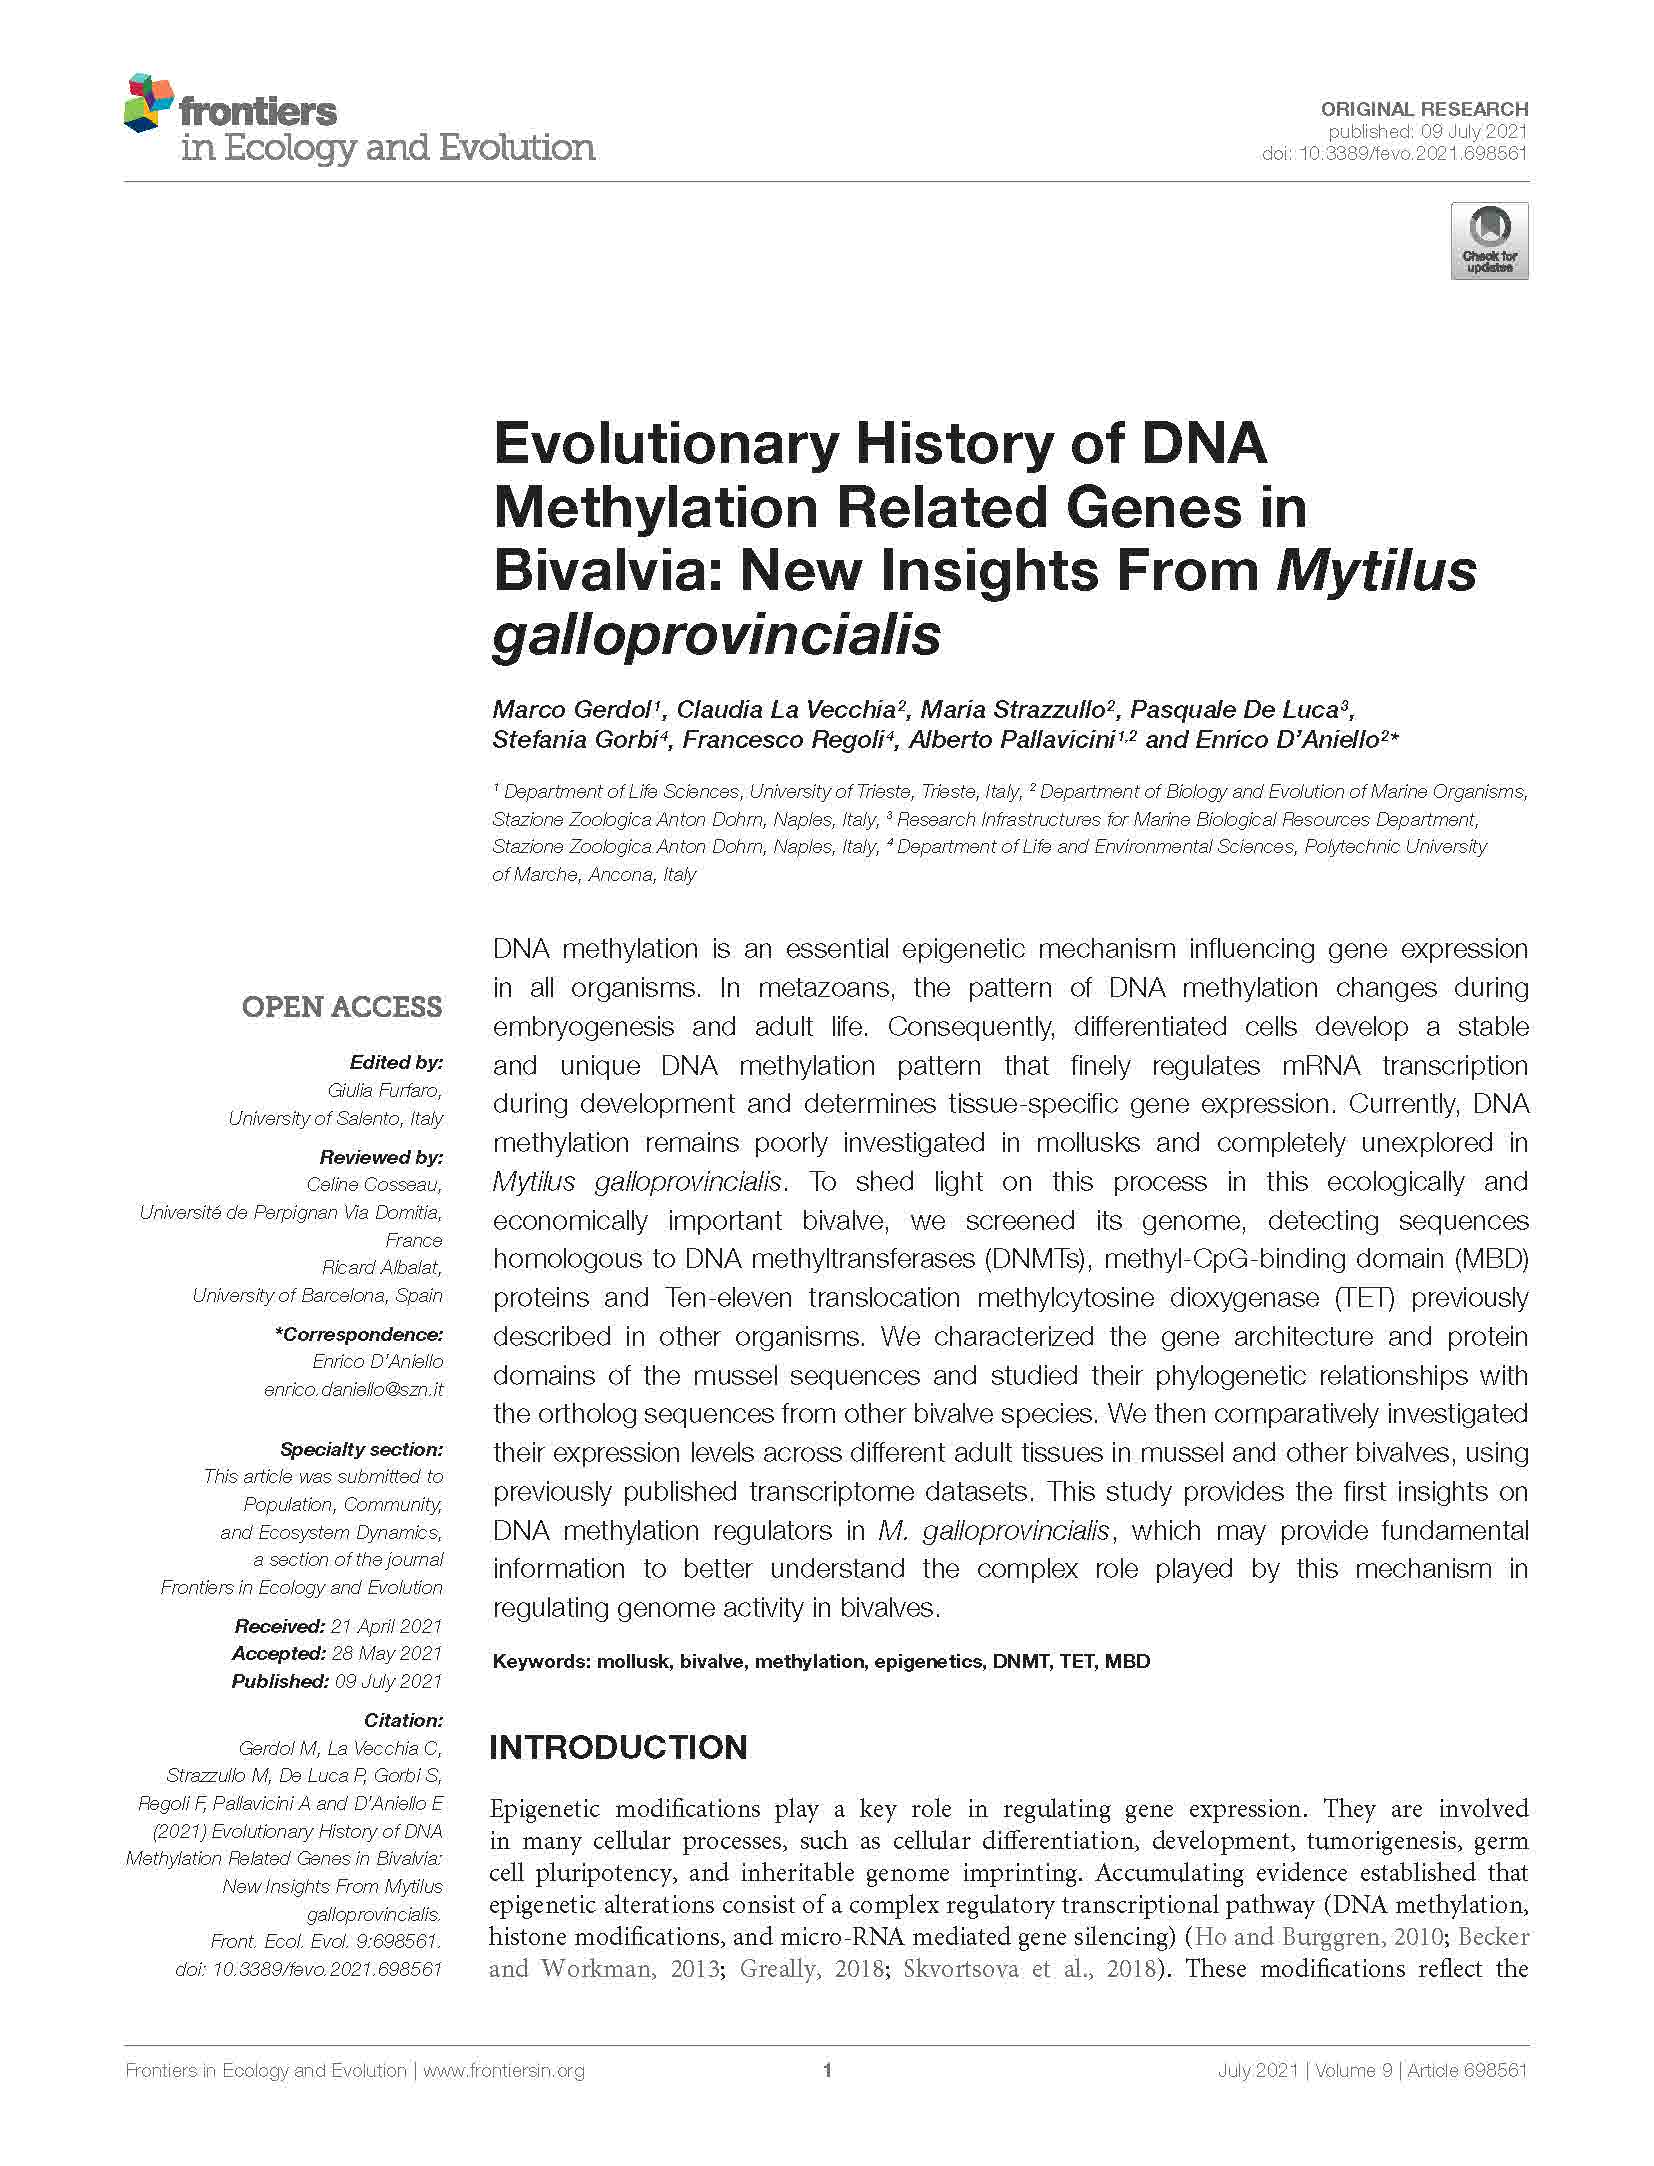 Evolutionary History of DNA Methylation Related Genes in Bivalvia New Insights From Mytilus galloprovincialis